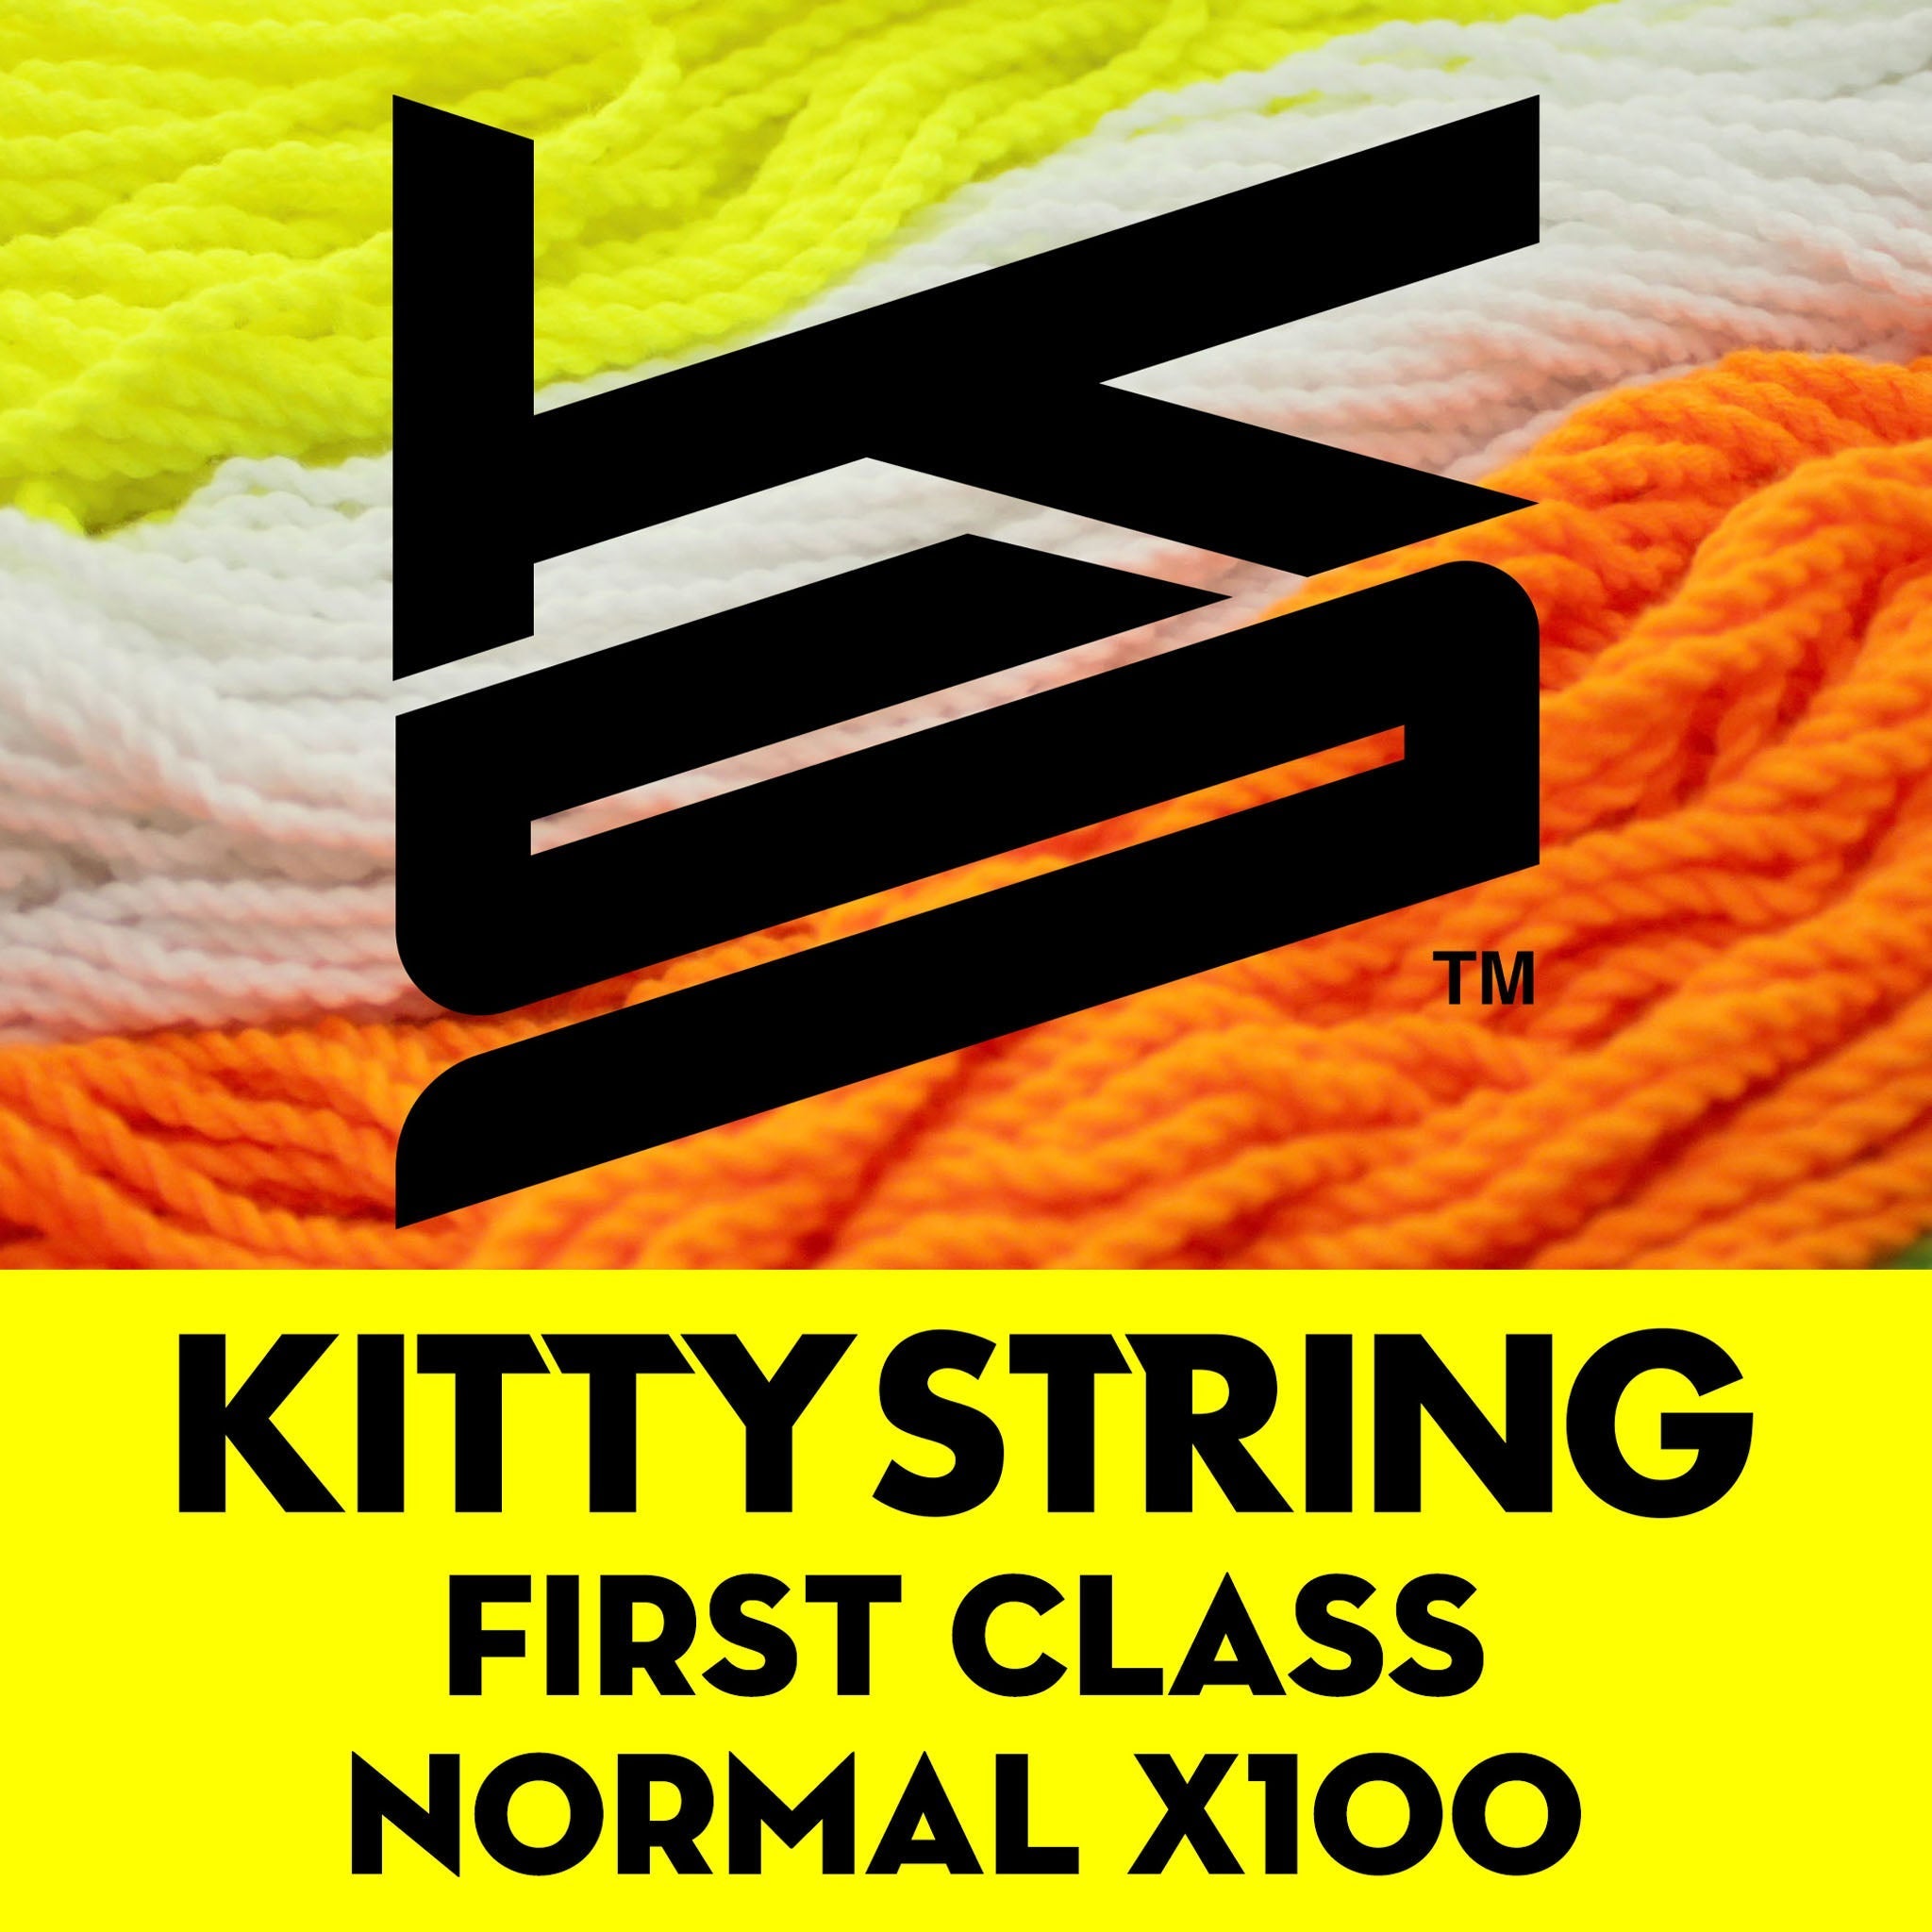 Kitty String (Poly100%) "First-Class" Normal x100 - Kitty Strings